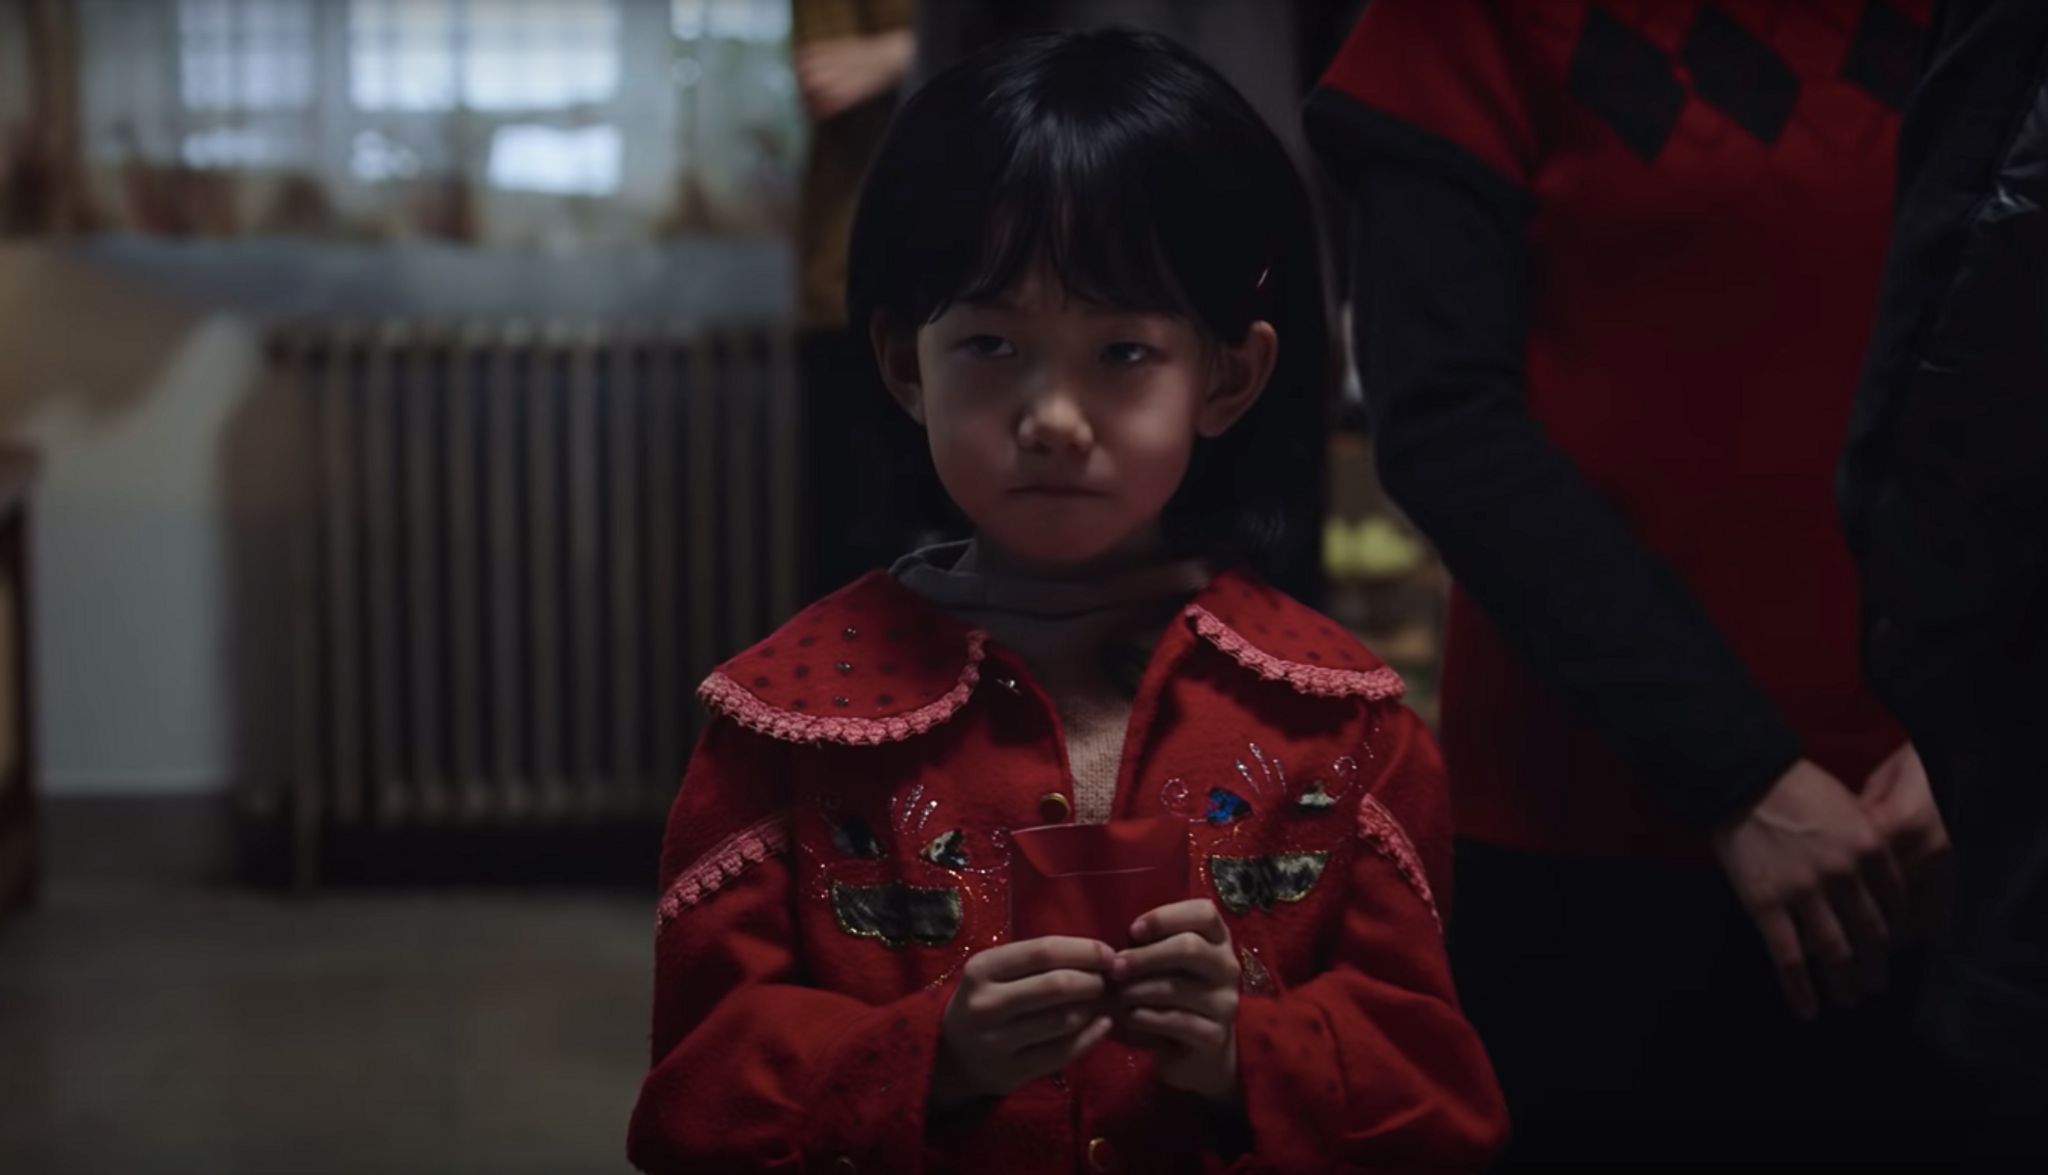 Nike explores changing traditions in playful CNY ad